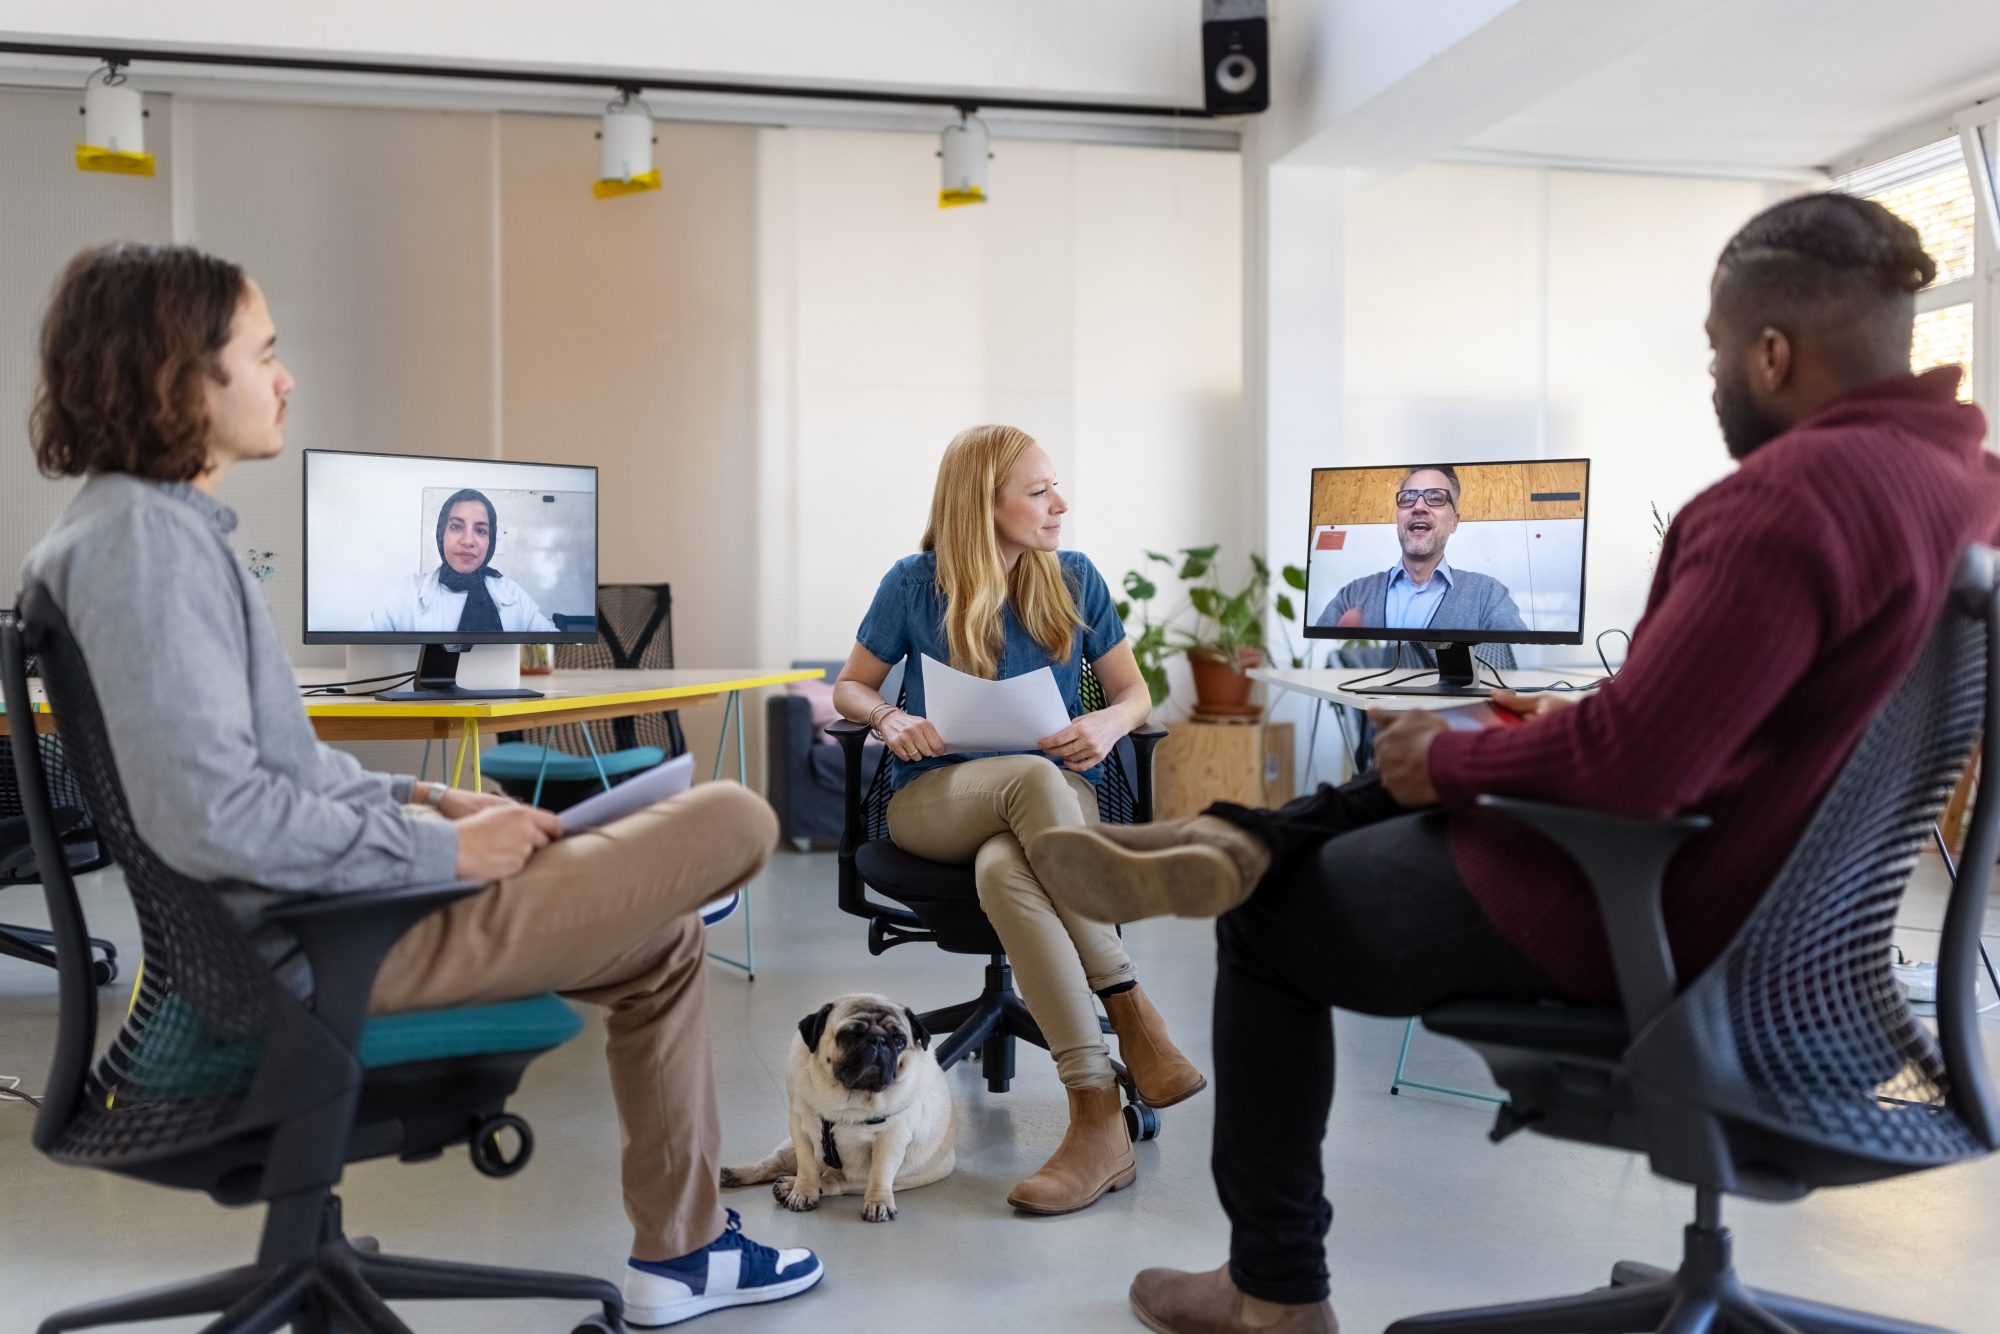 Startup businesspeople having a meeting at a small office with colleagues joining the meeting via video call. Diverse group of startup entrepreneurs meeting with colleagues working remotely over video conference.